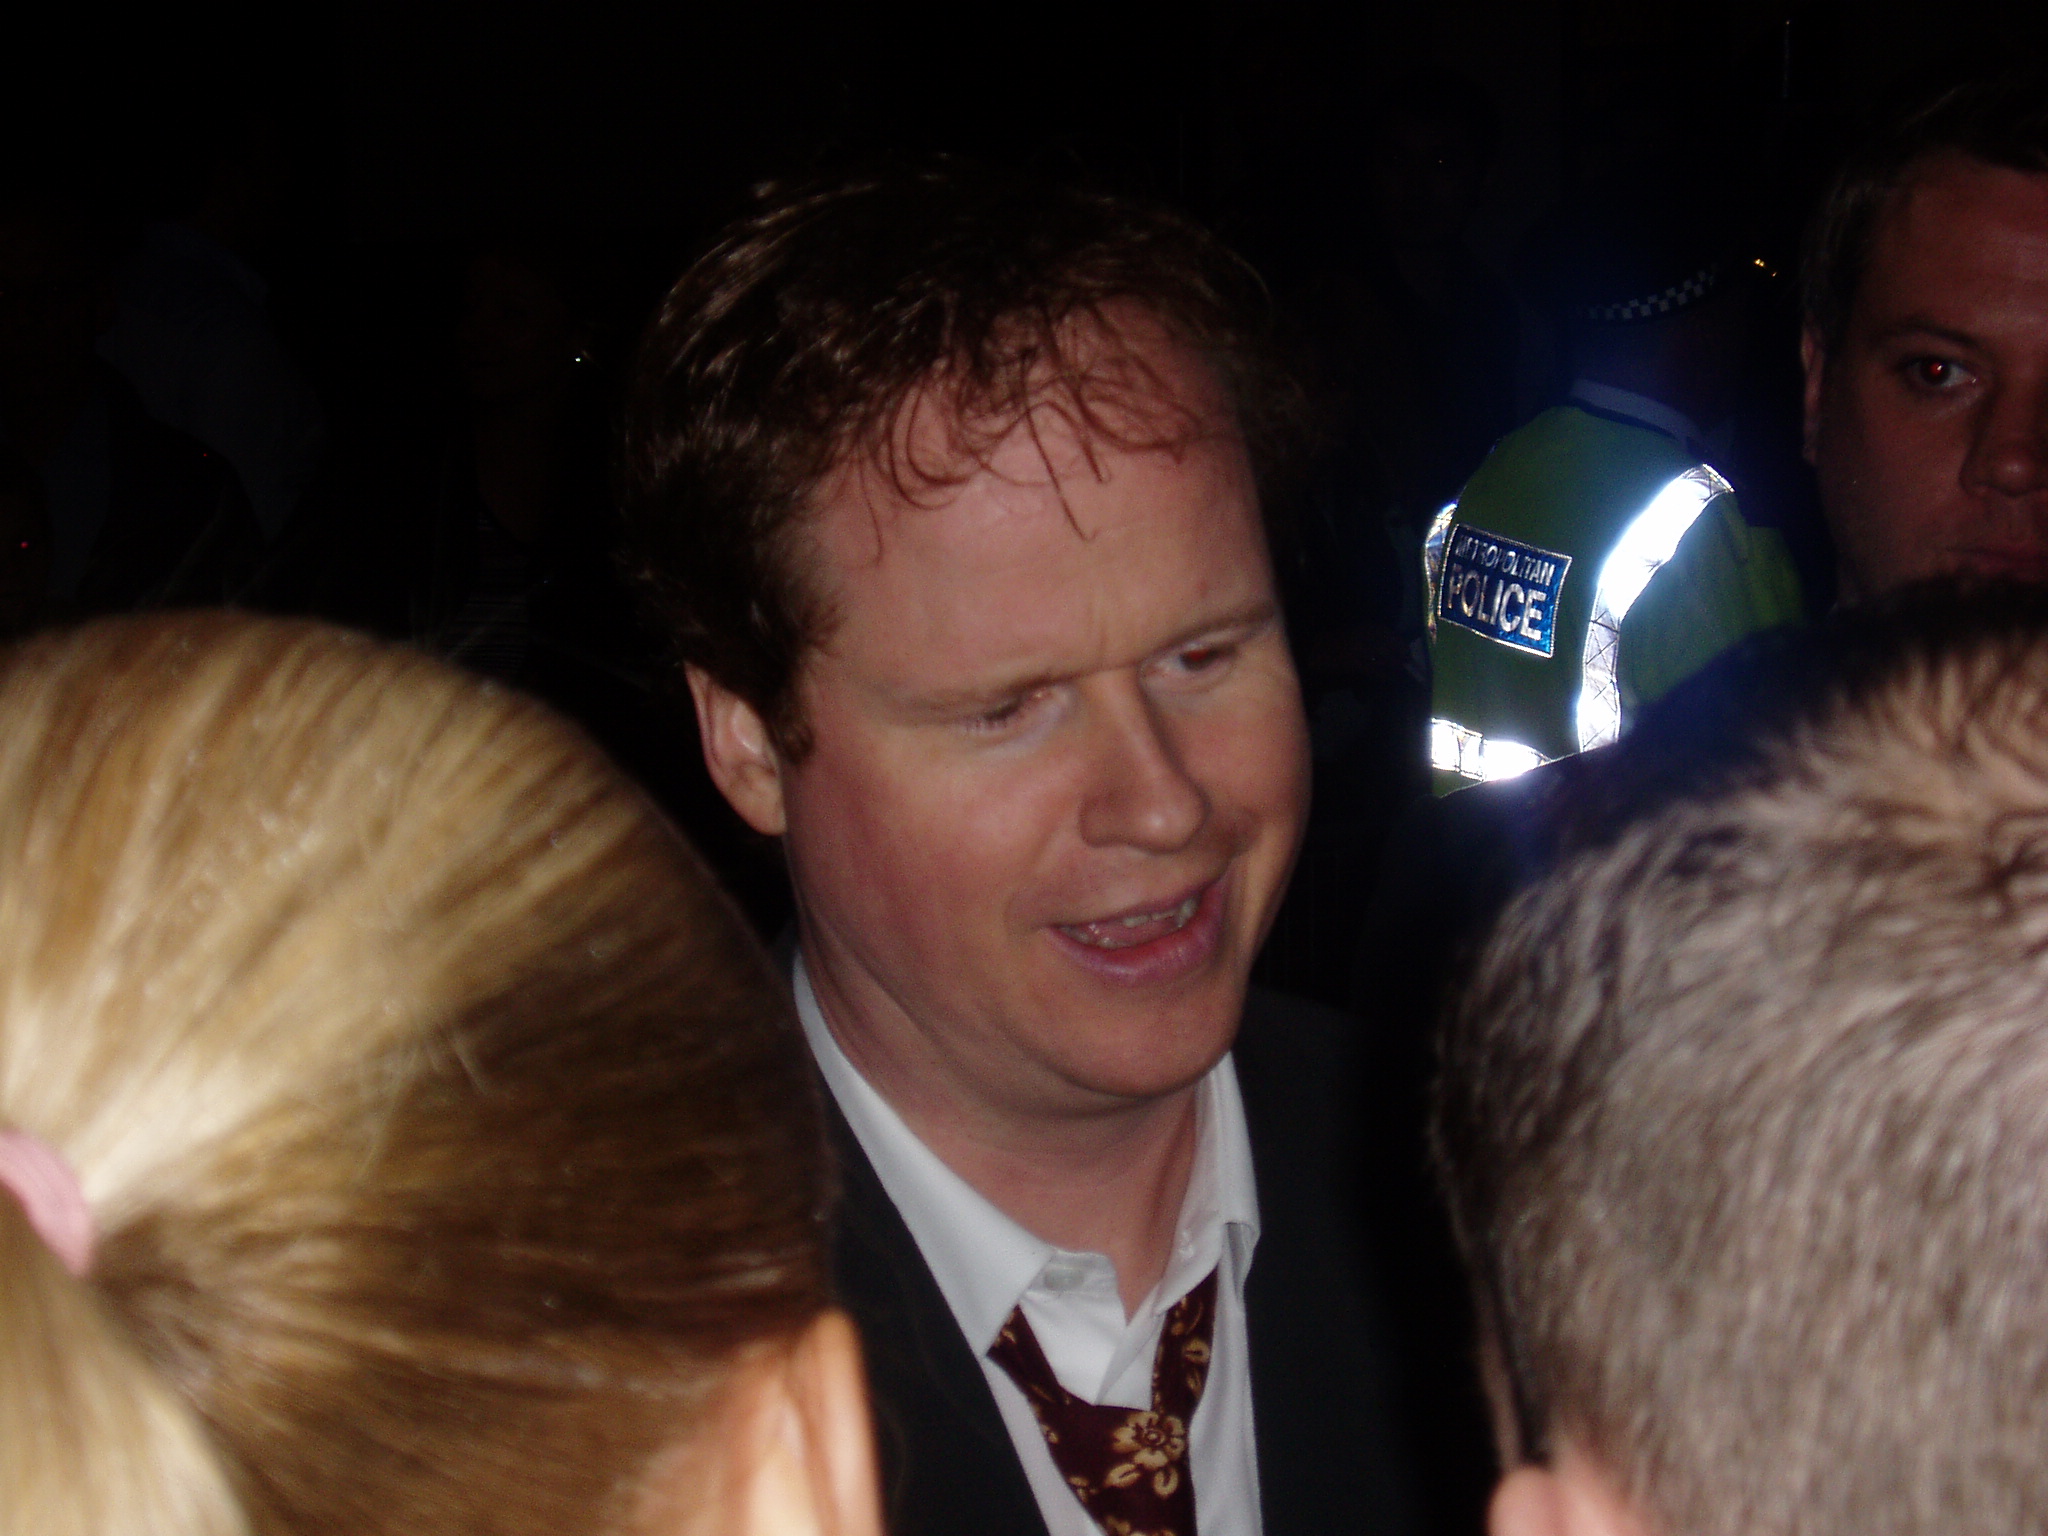 Joss Whedon at the premiere of Serenity